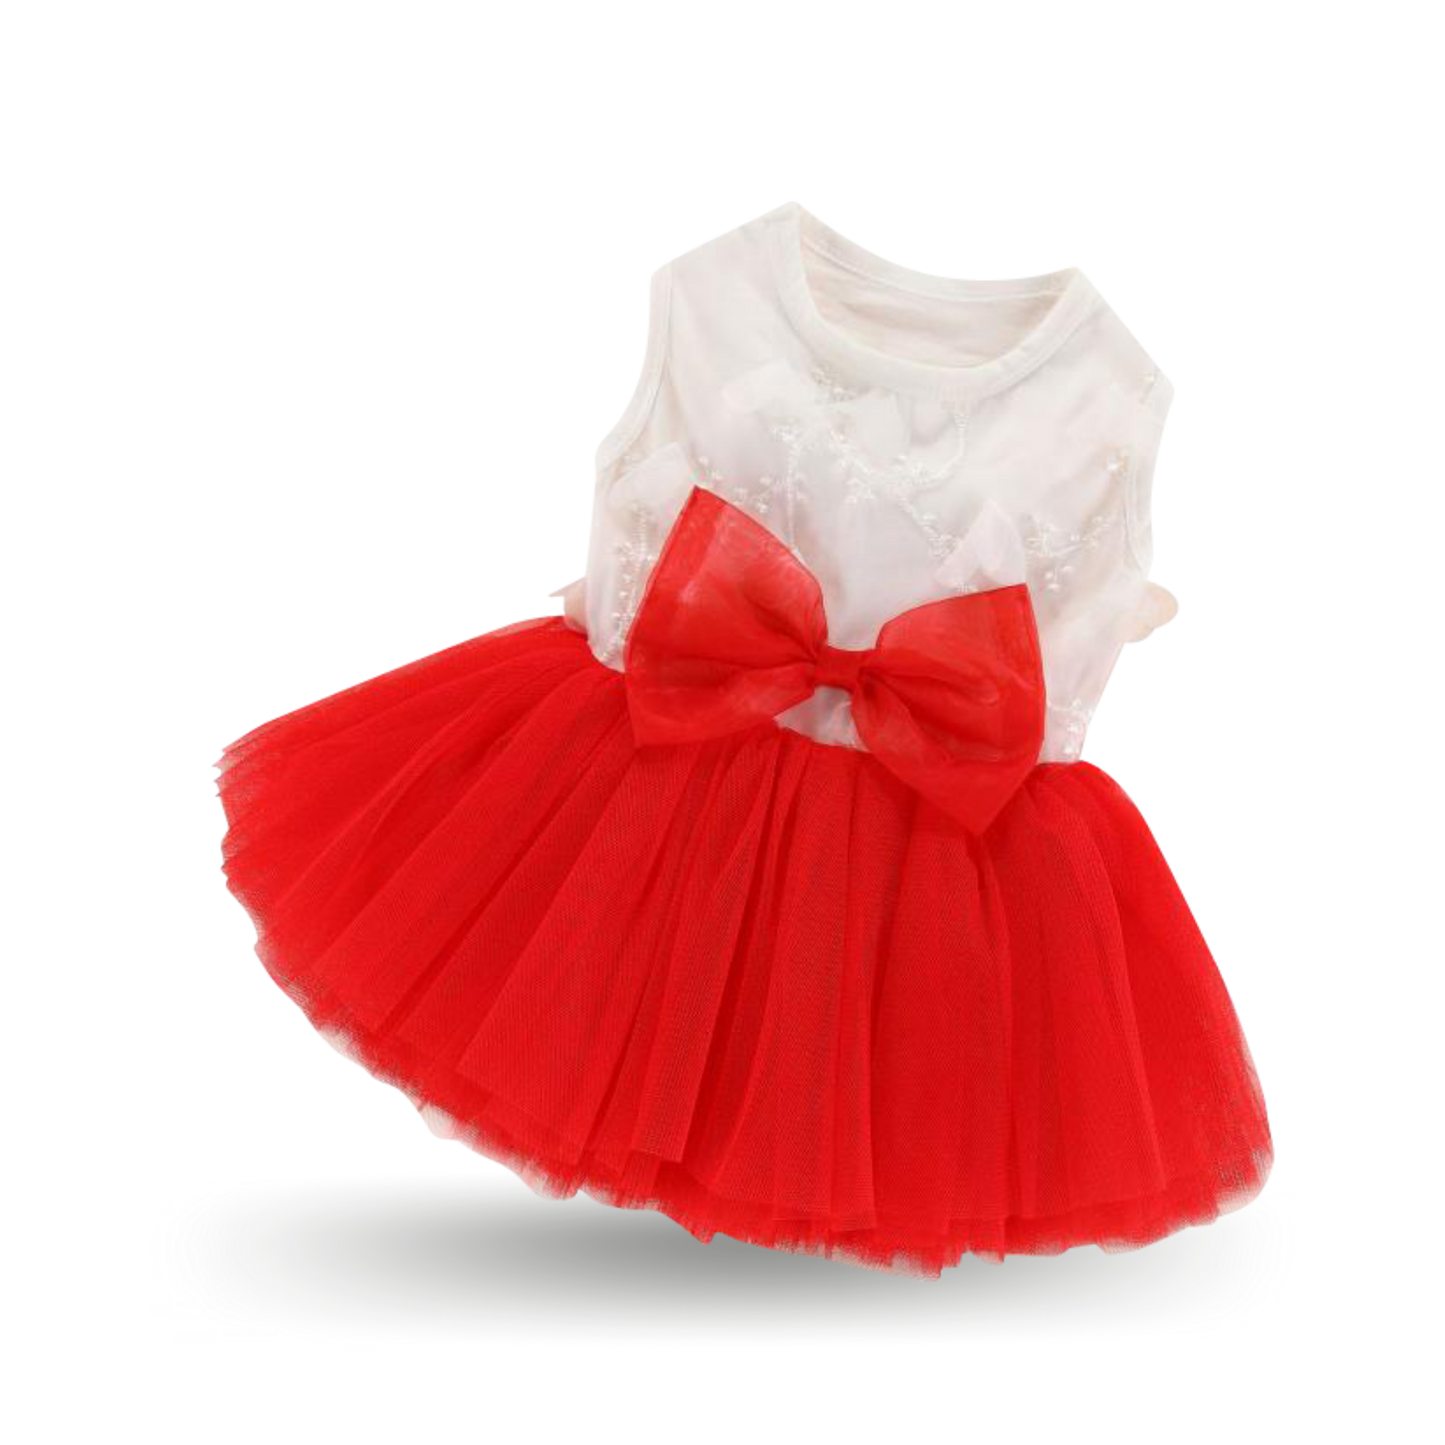 Soft cotton bodice with a fine embroidered mesh overlay, with pretty multi-layered red tulle skirt and red tulle bowtie at the waist